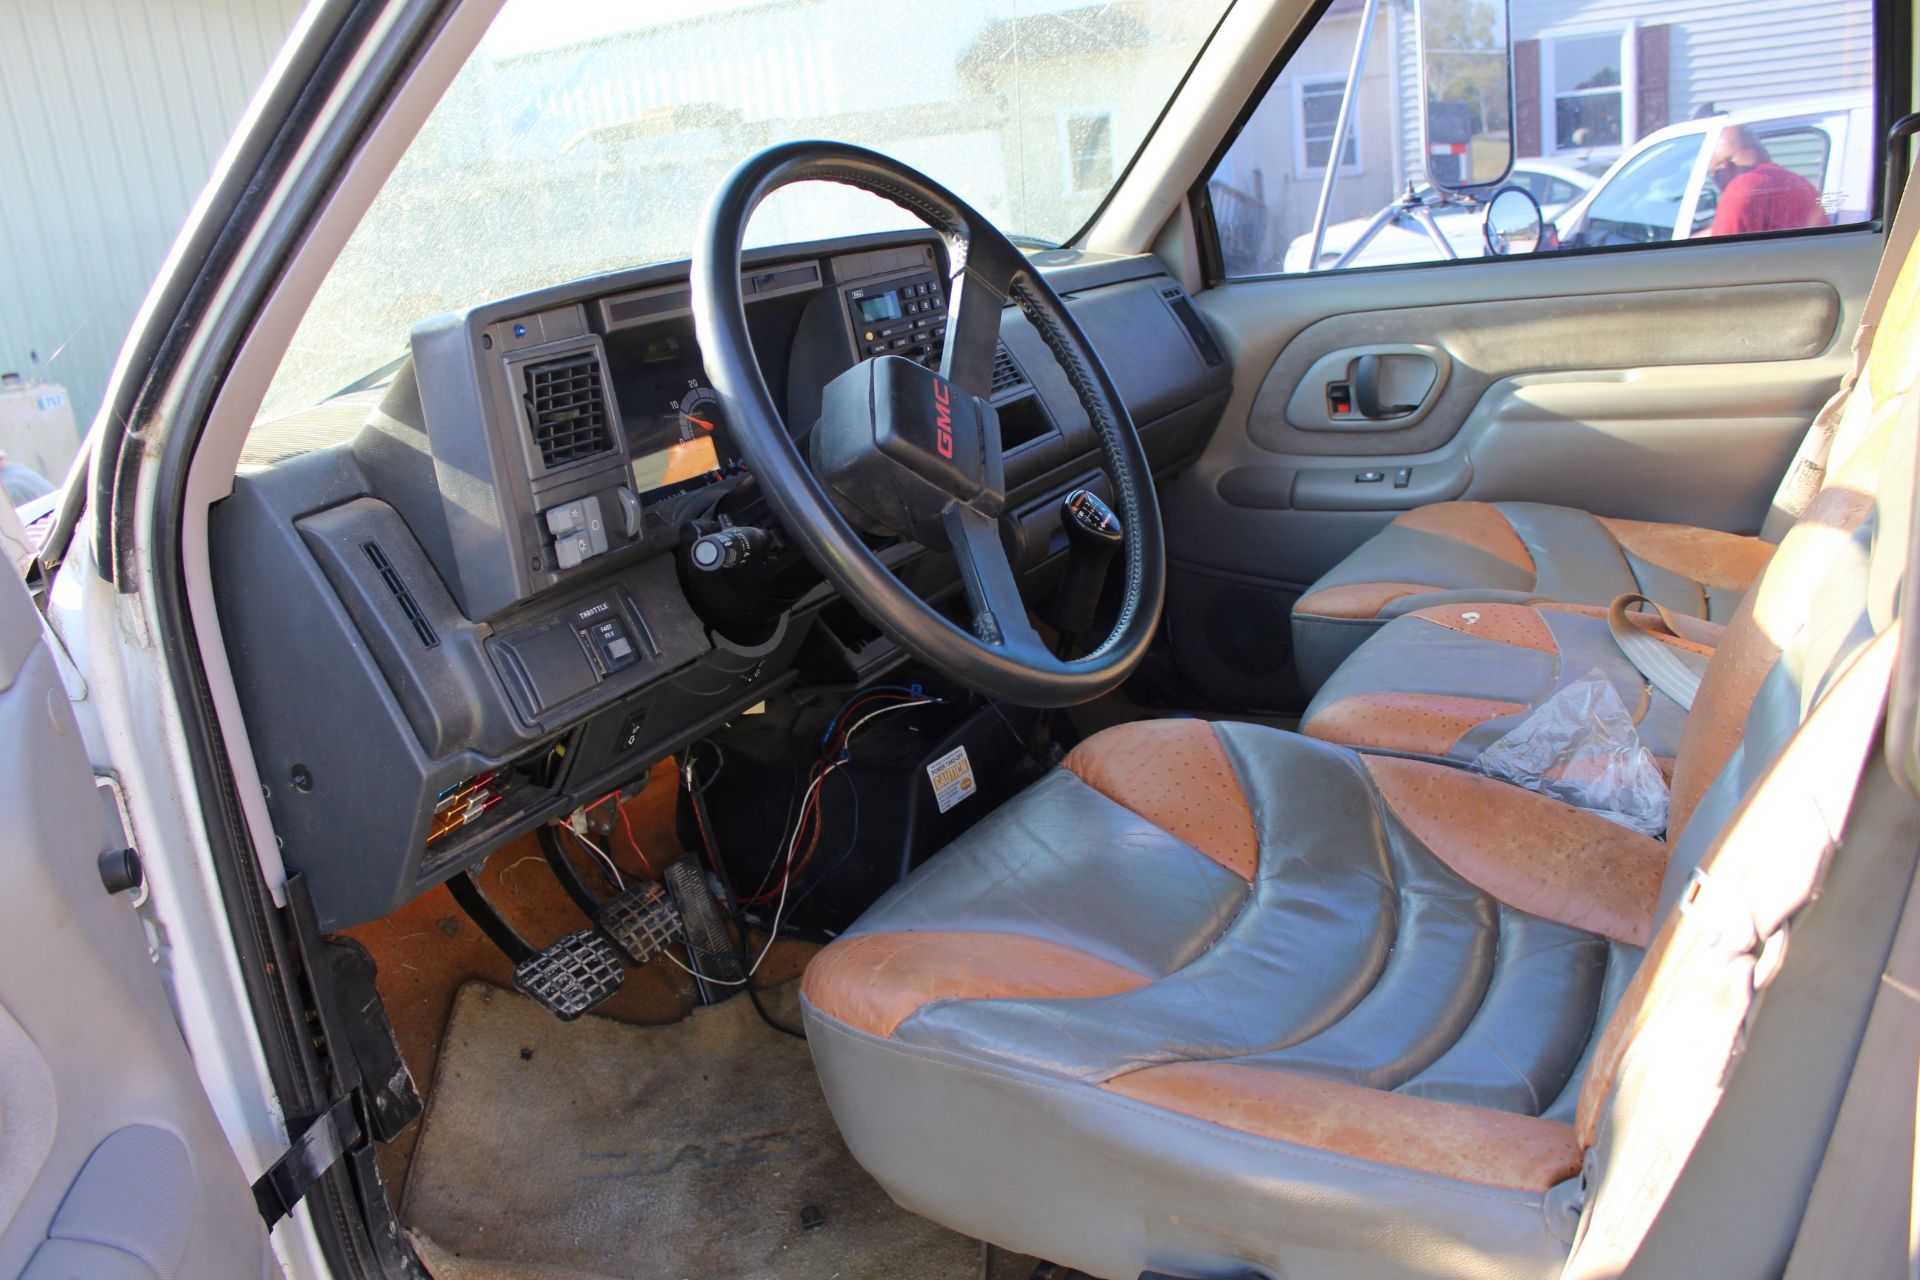 2001 GMC C6500 Crew Cab, 12' Flatbed, CAT 3126, 6 Plus Trans., Leather Interior w/ Ostrich Bolsters, - Image 3 of 3